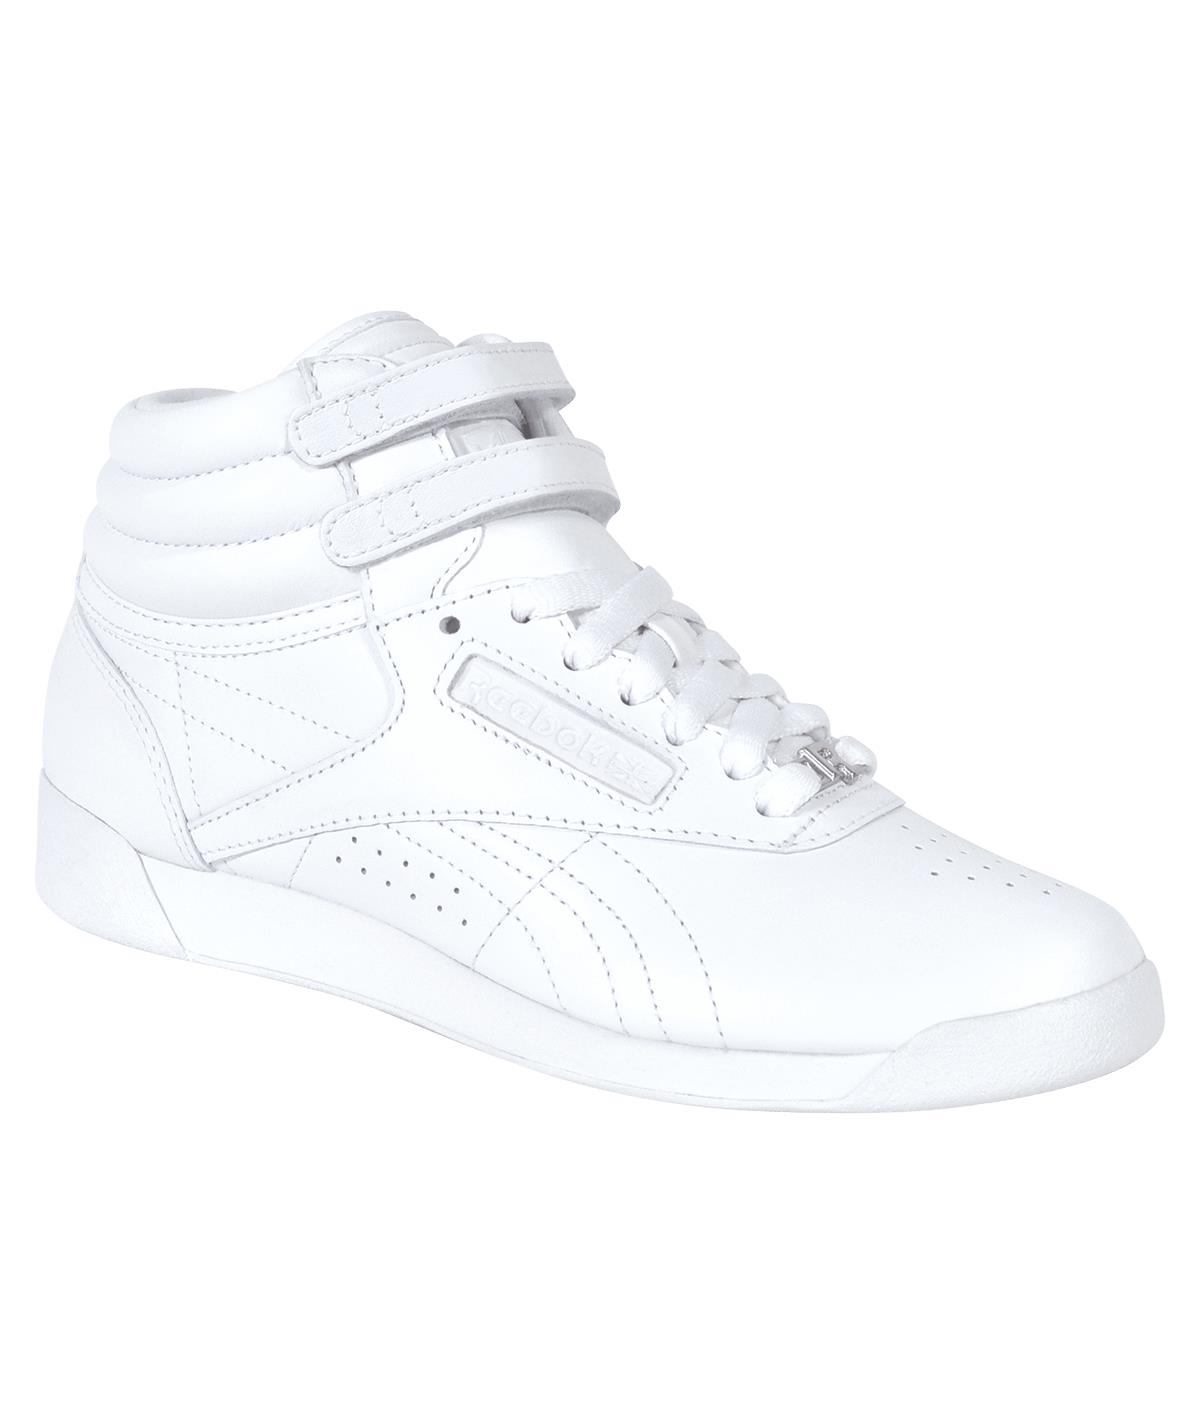 Cheer on with Style: High Top Reebok Cheer Shoes